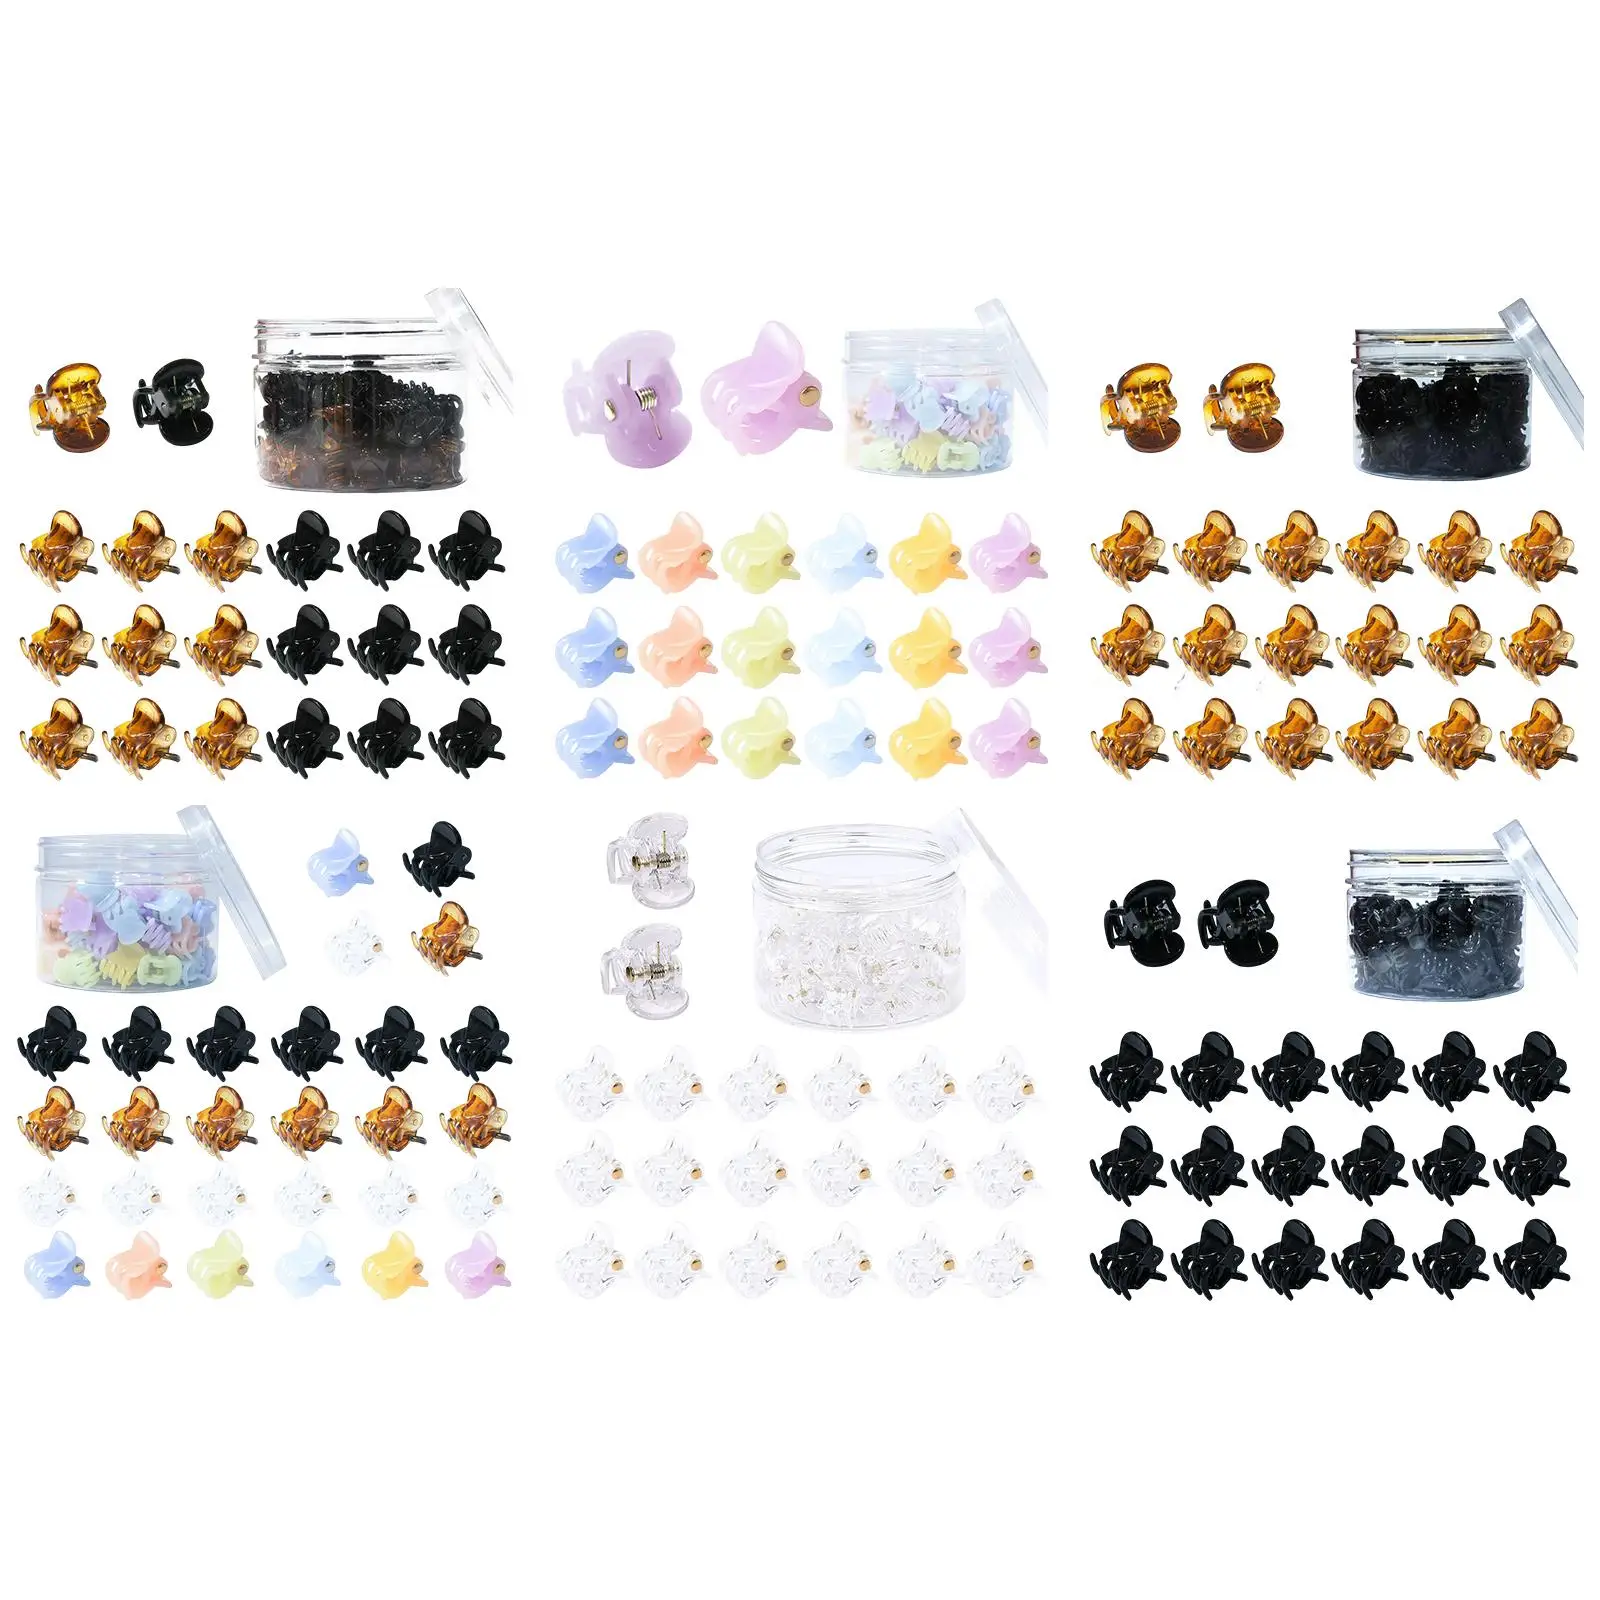 48 Pieces Mini Hair Clips with Transparent Box Multifunction Nonslip Hairclips Hairdressing Accessory Clamps School Party